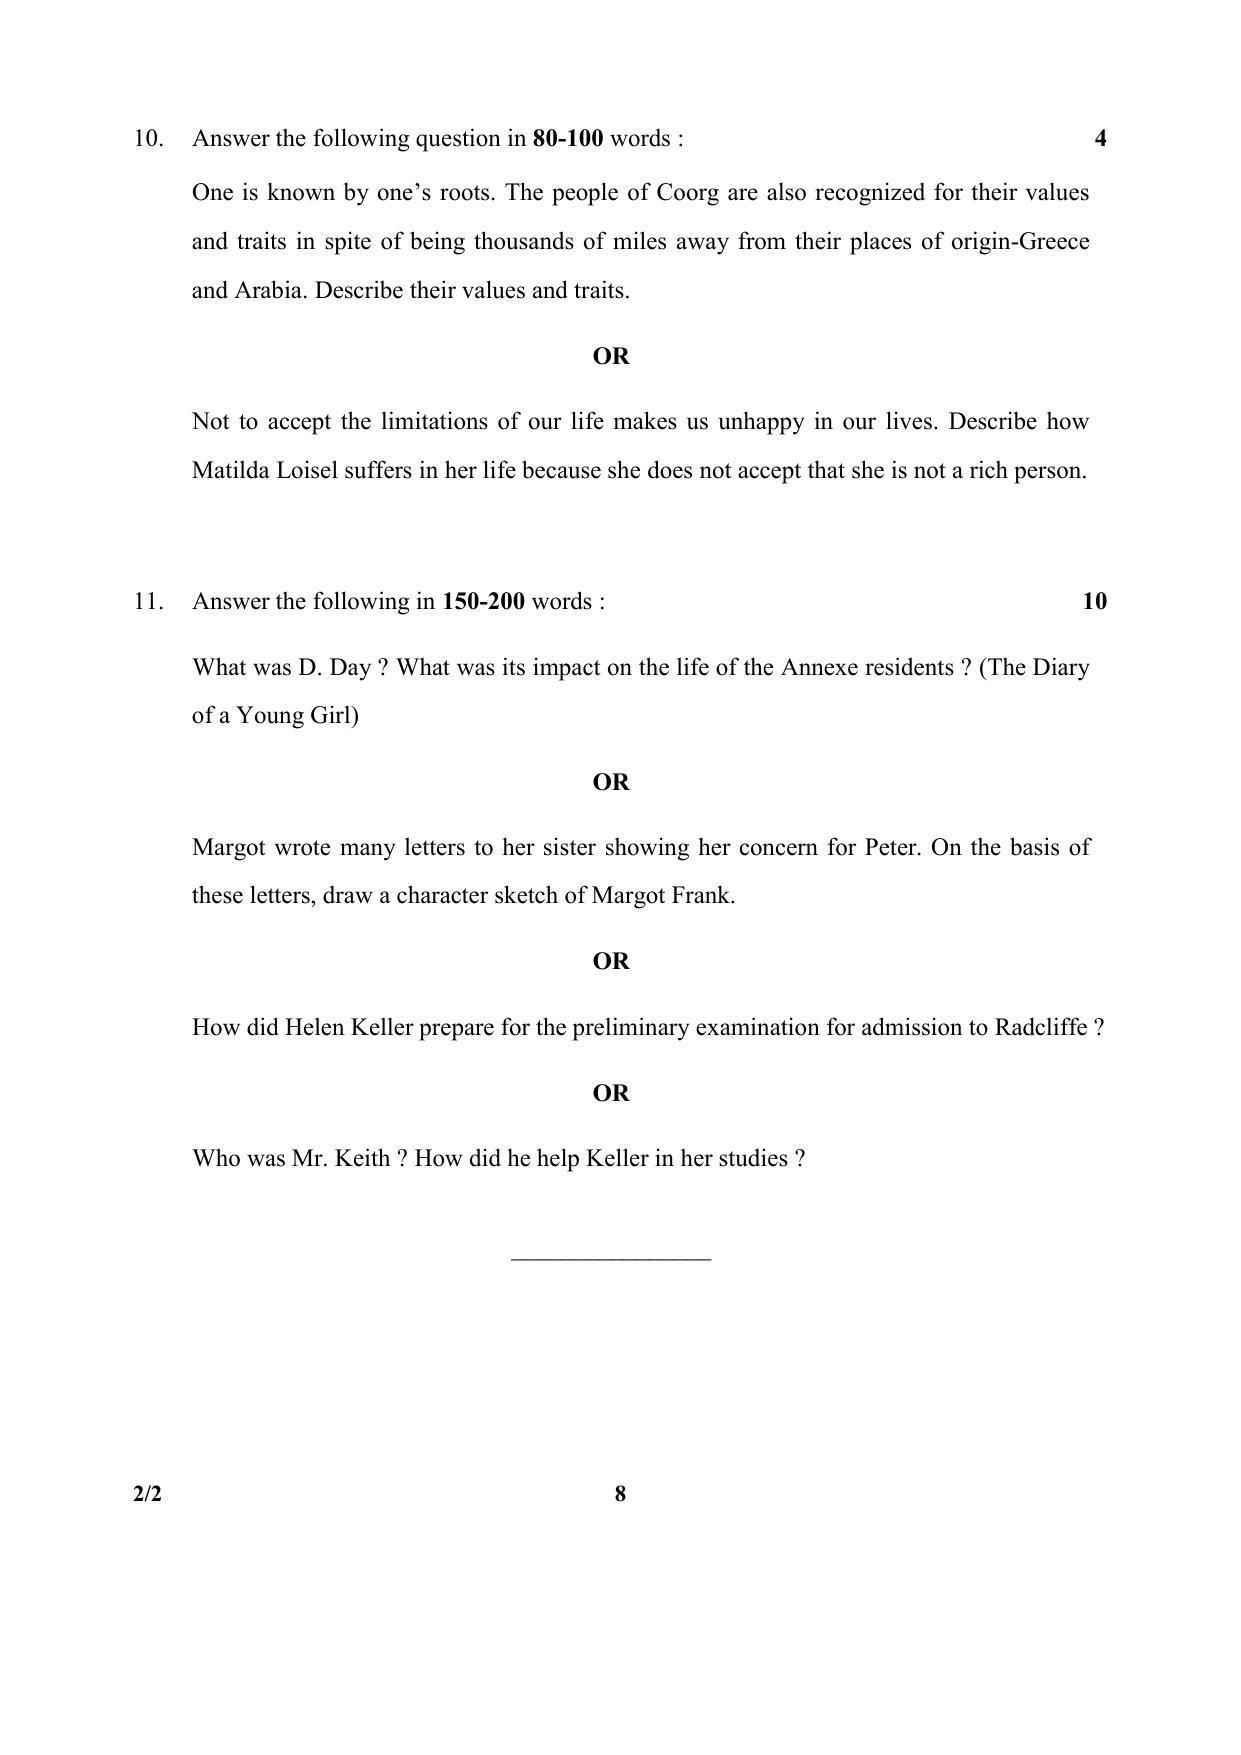 CBSE Class 10 2-2 English (Language And Literature) 2017-comptt Question Paper - Page 8